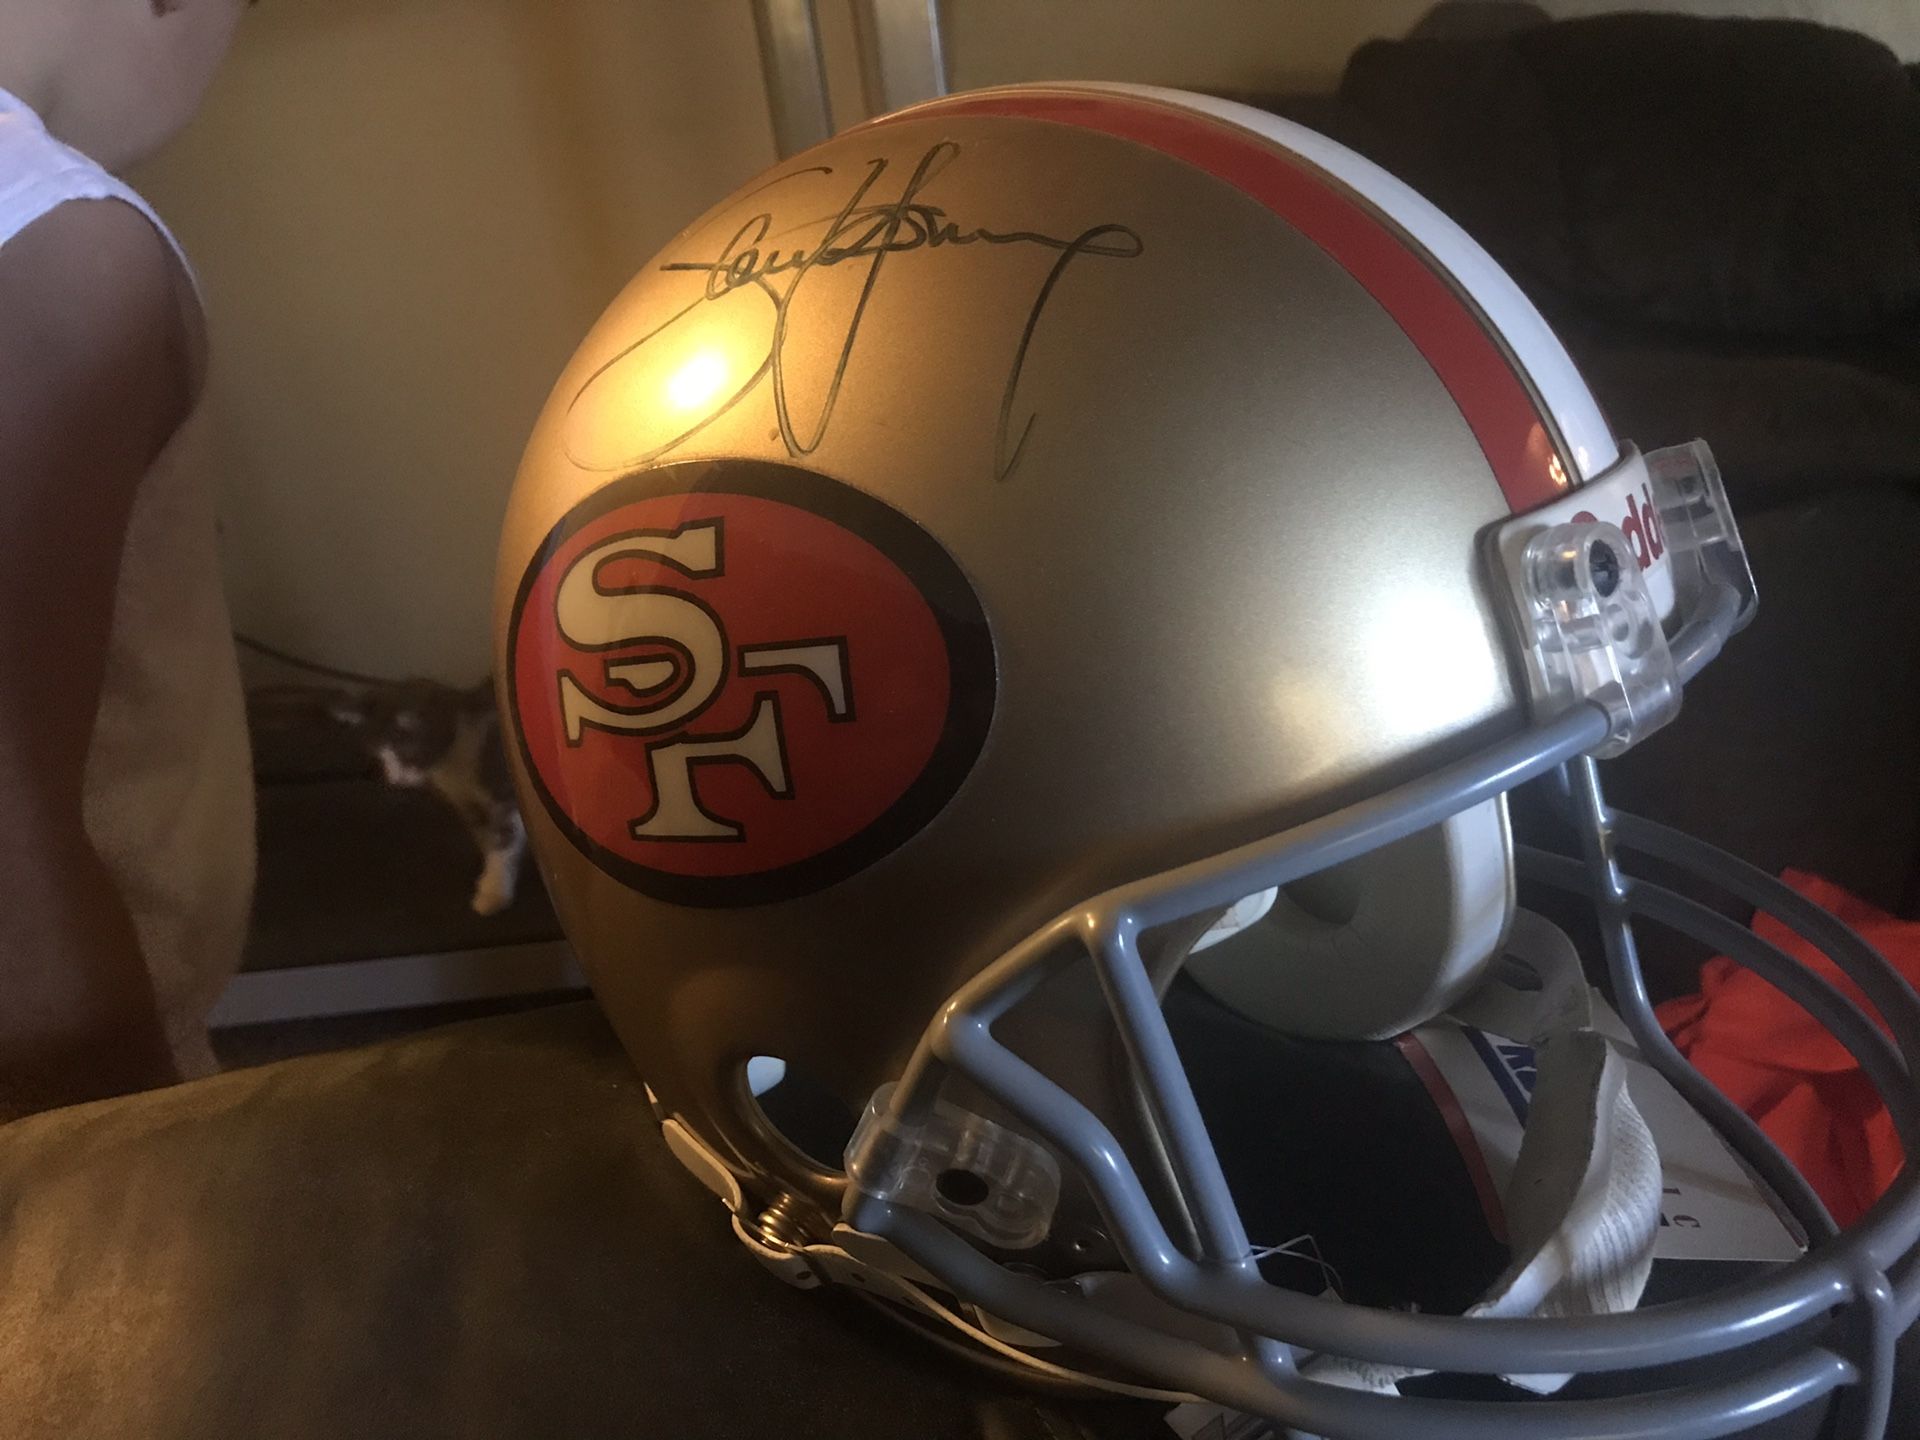 Auto graphed Steve Young helmet